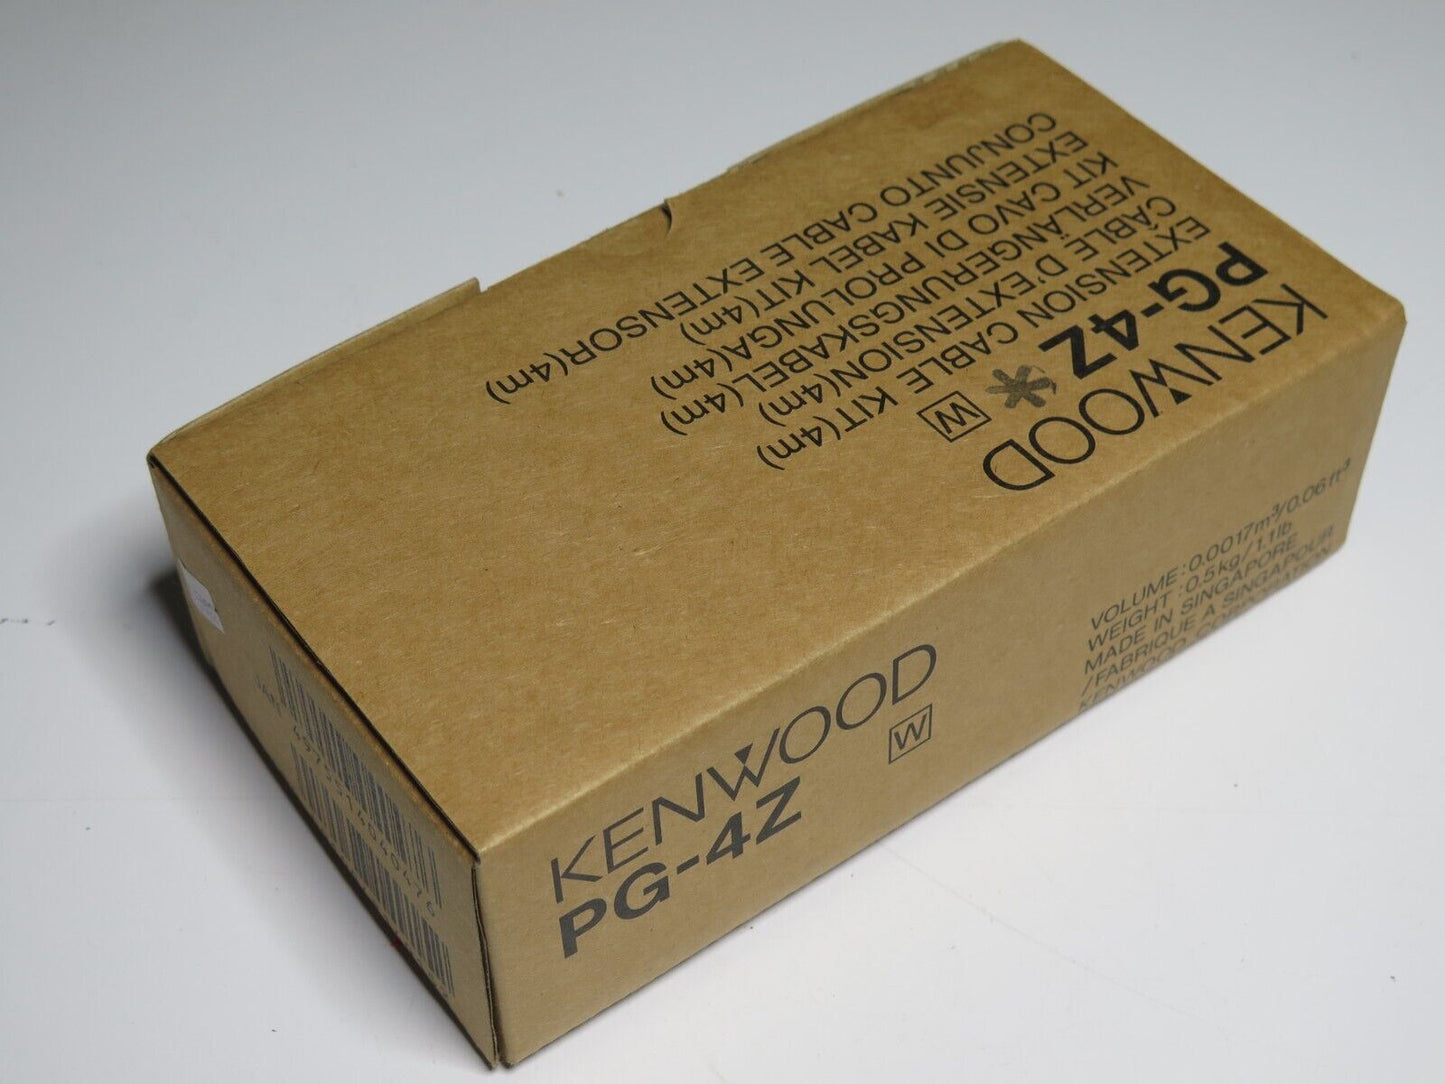 Kenwood Separation Cable Kit PG-4Z for TS-480HX & TS-480SAT Radios